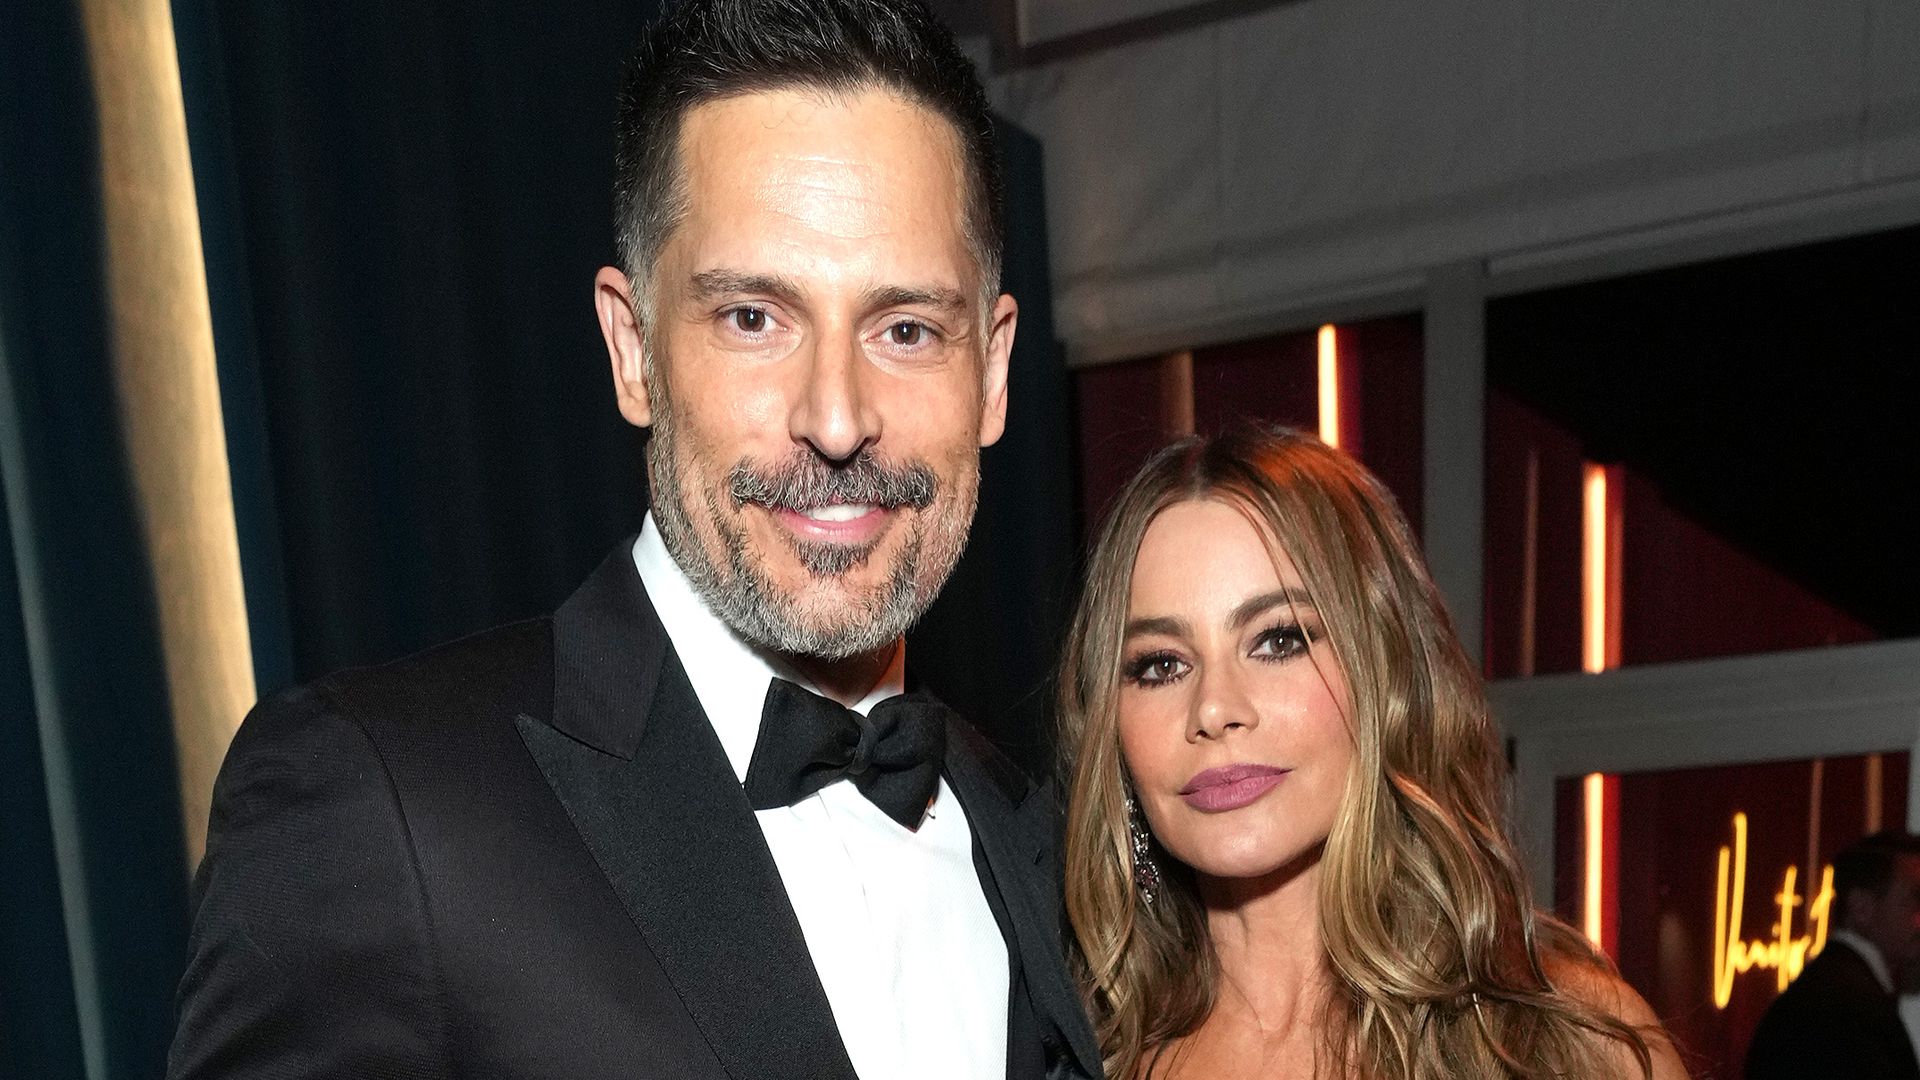 Joe Manganiello officially files for divorce from Sofia Vergara citing  'irreconcilable differences